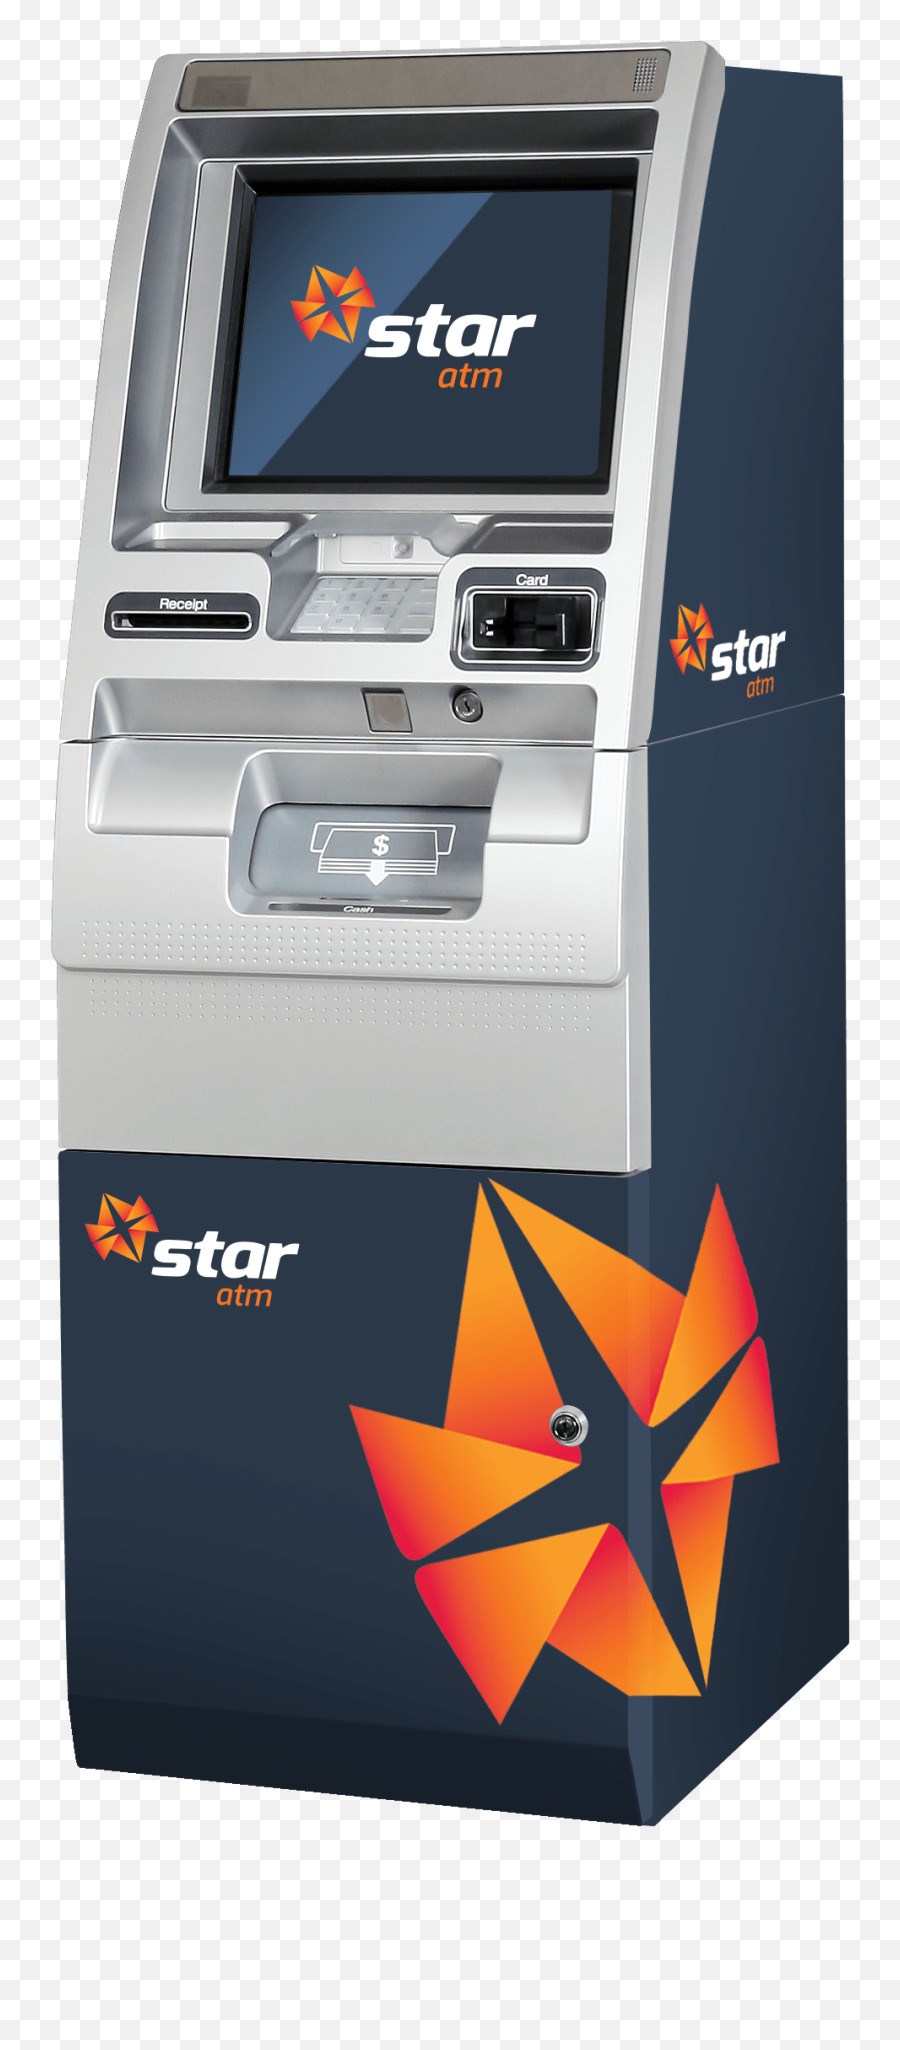 Download Atm Machines - Star Atm Png,Atm Png